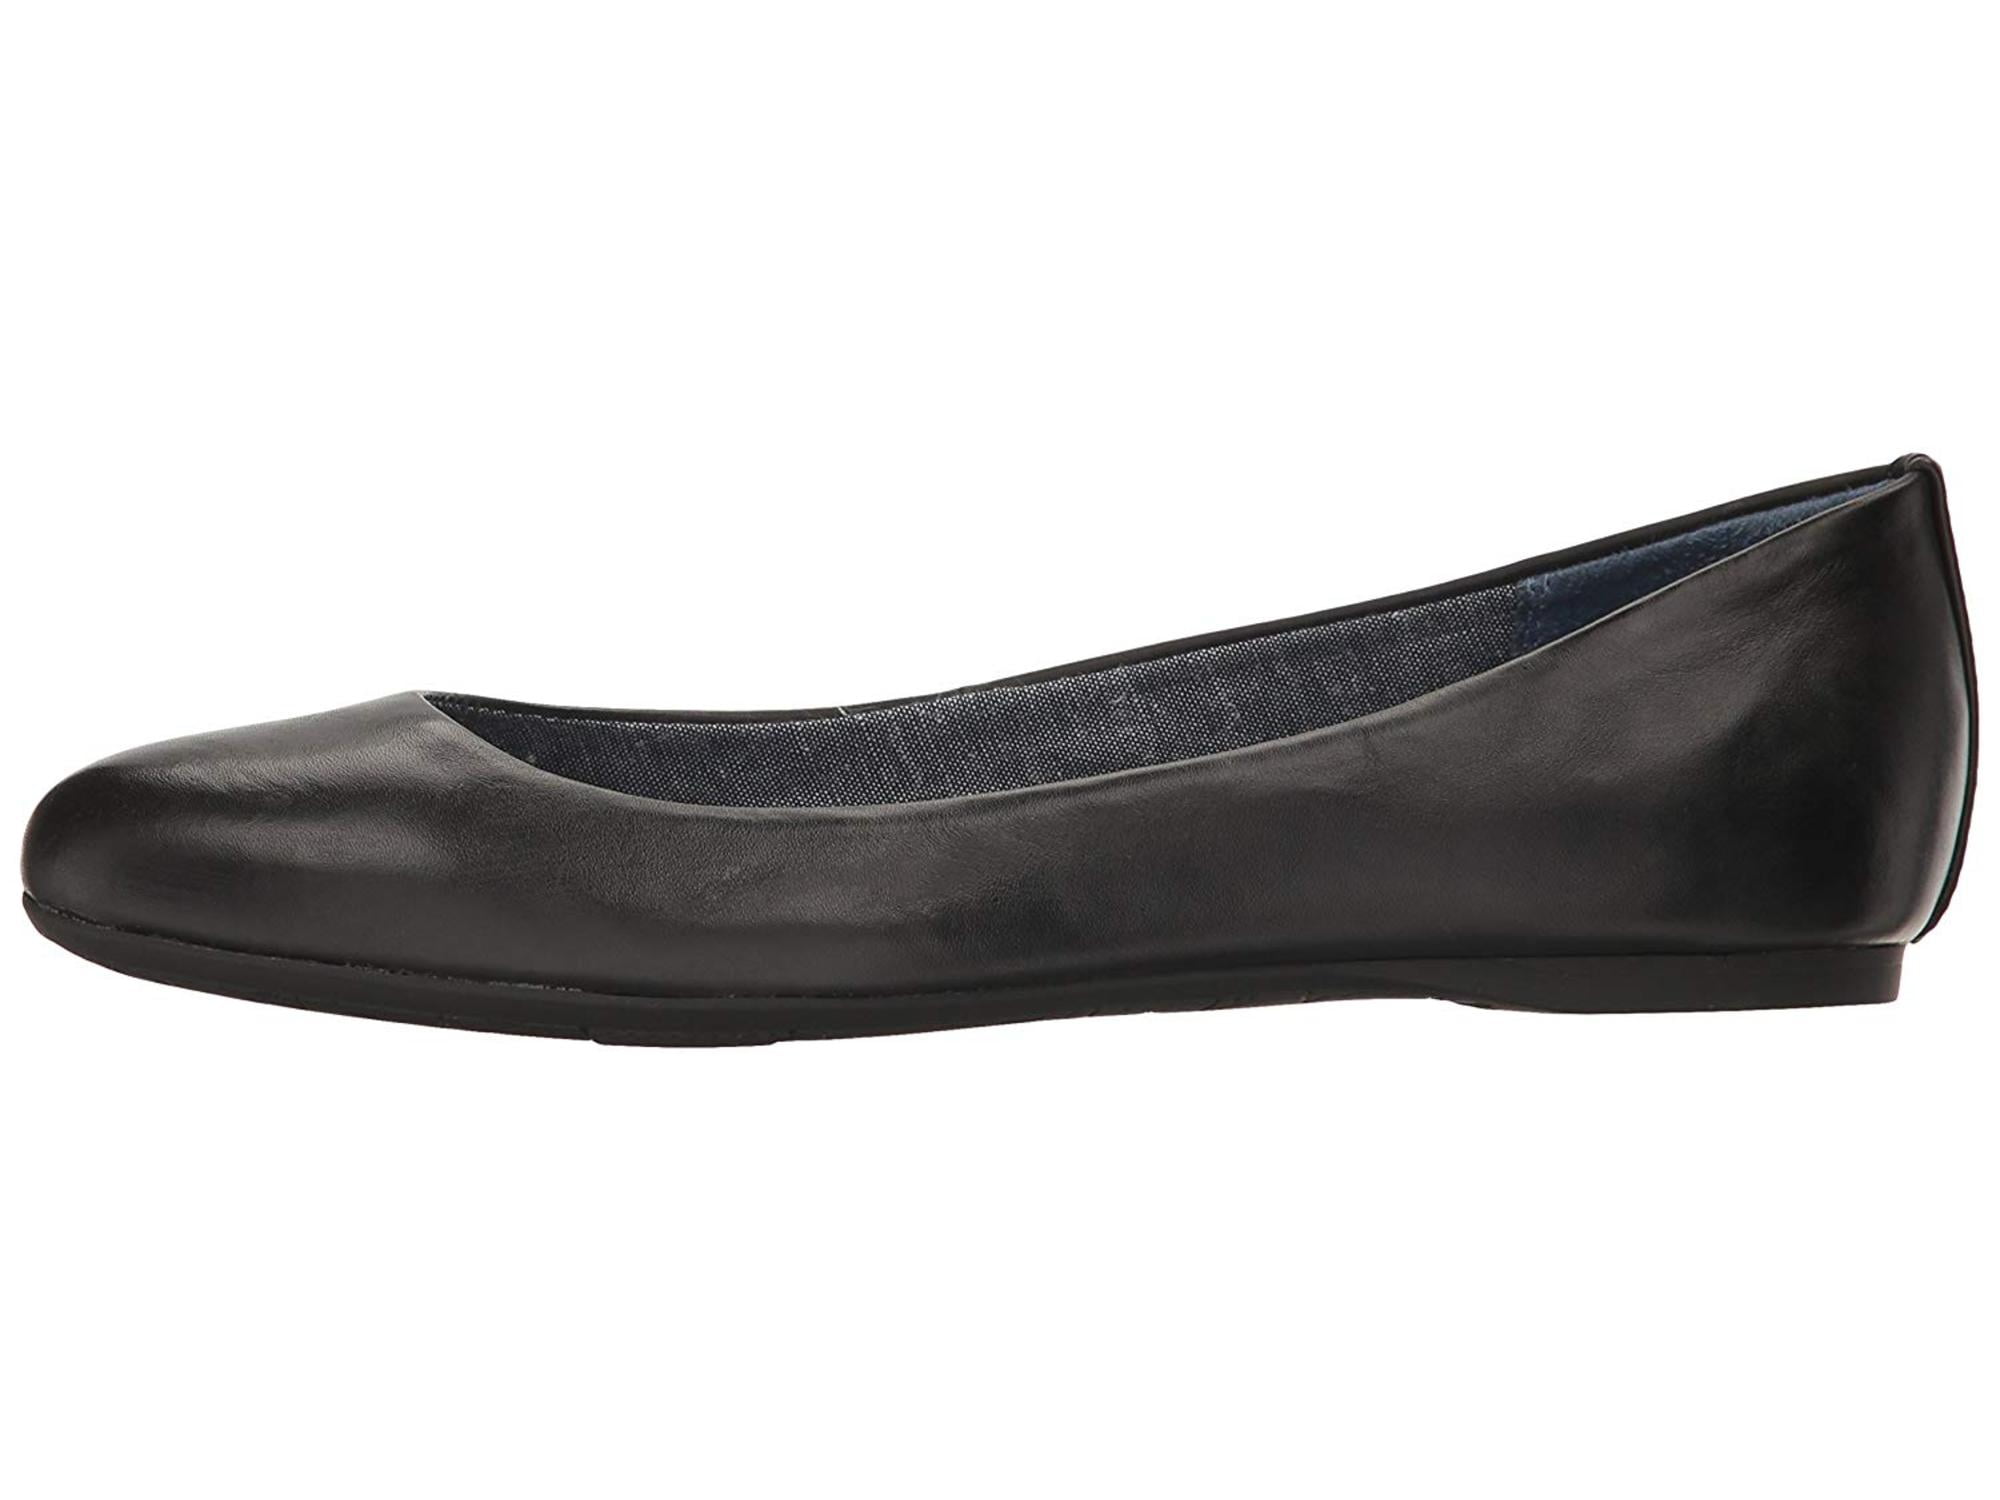 Dr. Scholl's Shoes - Dr. Scholl's Womens Giorgie Round Toe Ballet Flats ...